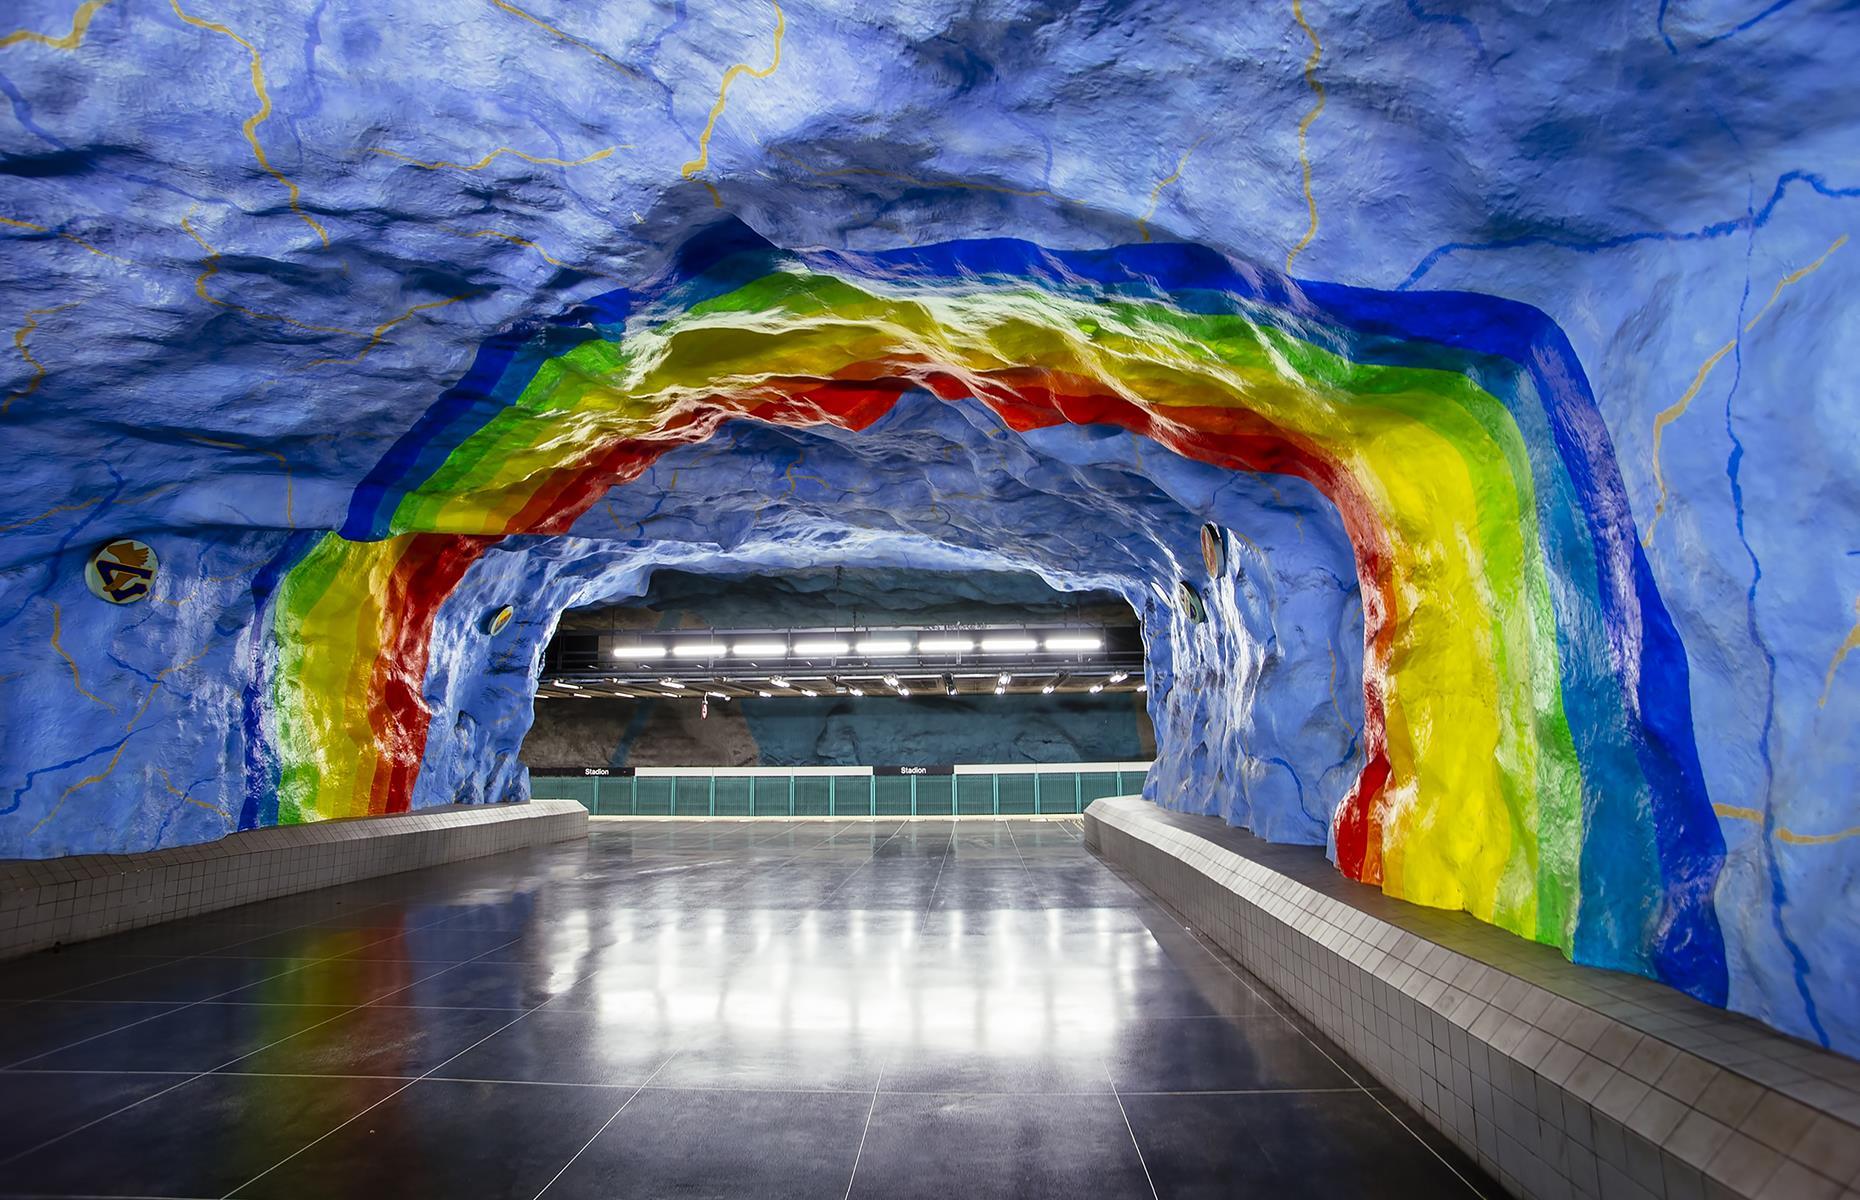 Painted sky-blue with rainbow patterns all over, including a massive rainbow arch stretching across the tunnel connecting two platforms, Stadion station was decorated to commemorate the 1912 Stockholm Olympics. The rainbow represents the colors in the Olympic rings.